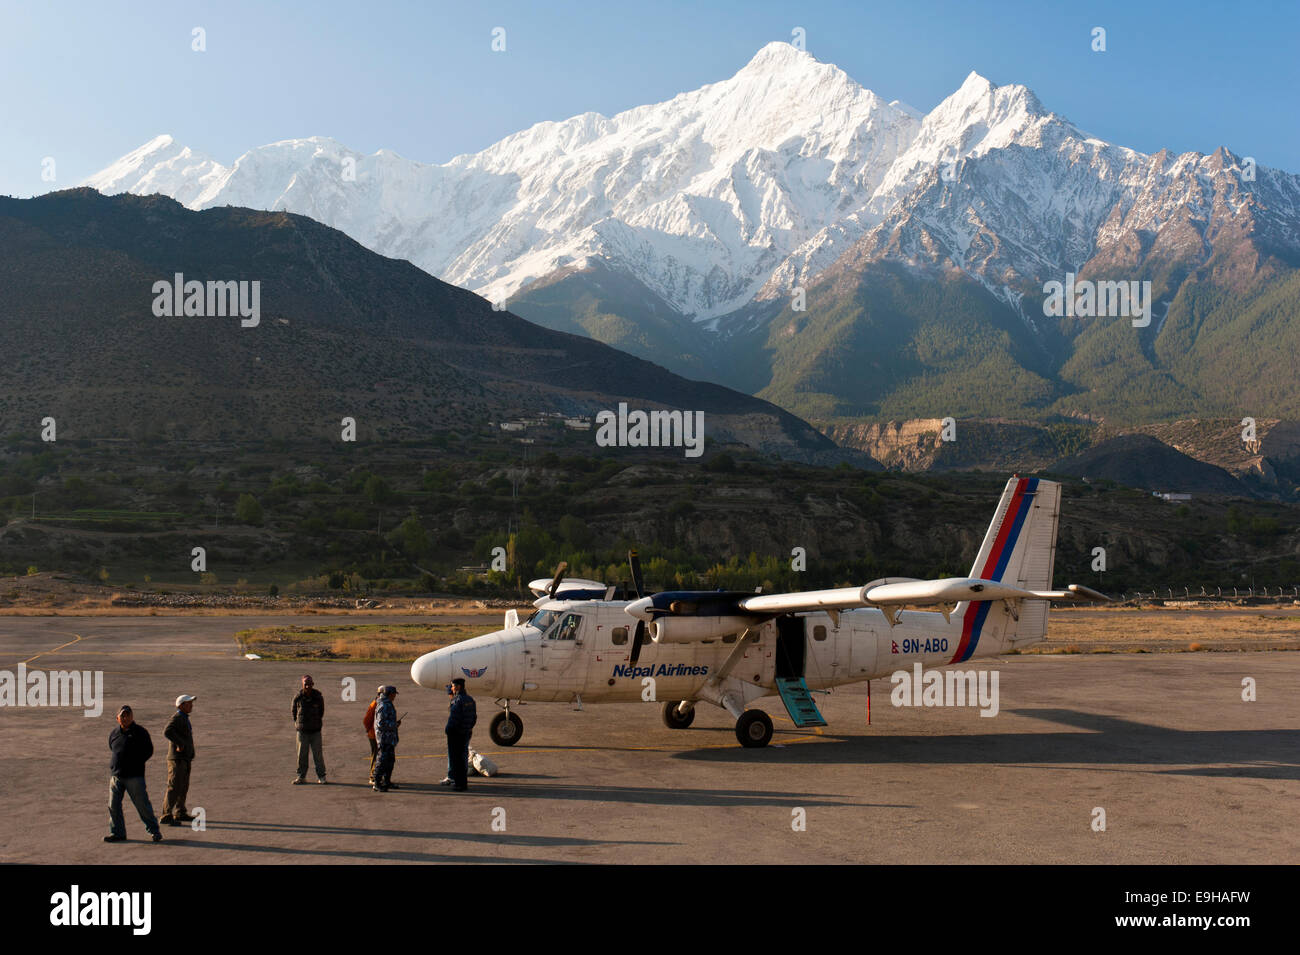 Propeller aircraft DHC-6 Twin Otter at Jomsom airport, behind the snow-capped mountain Nilgiri North, Lower Mustang, Nepal Stock Photo